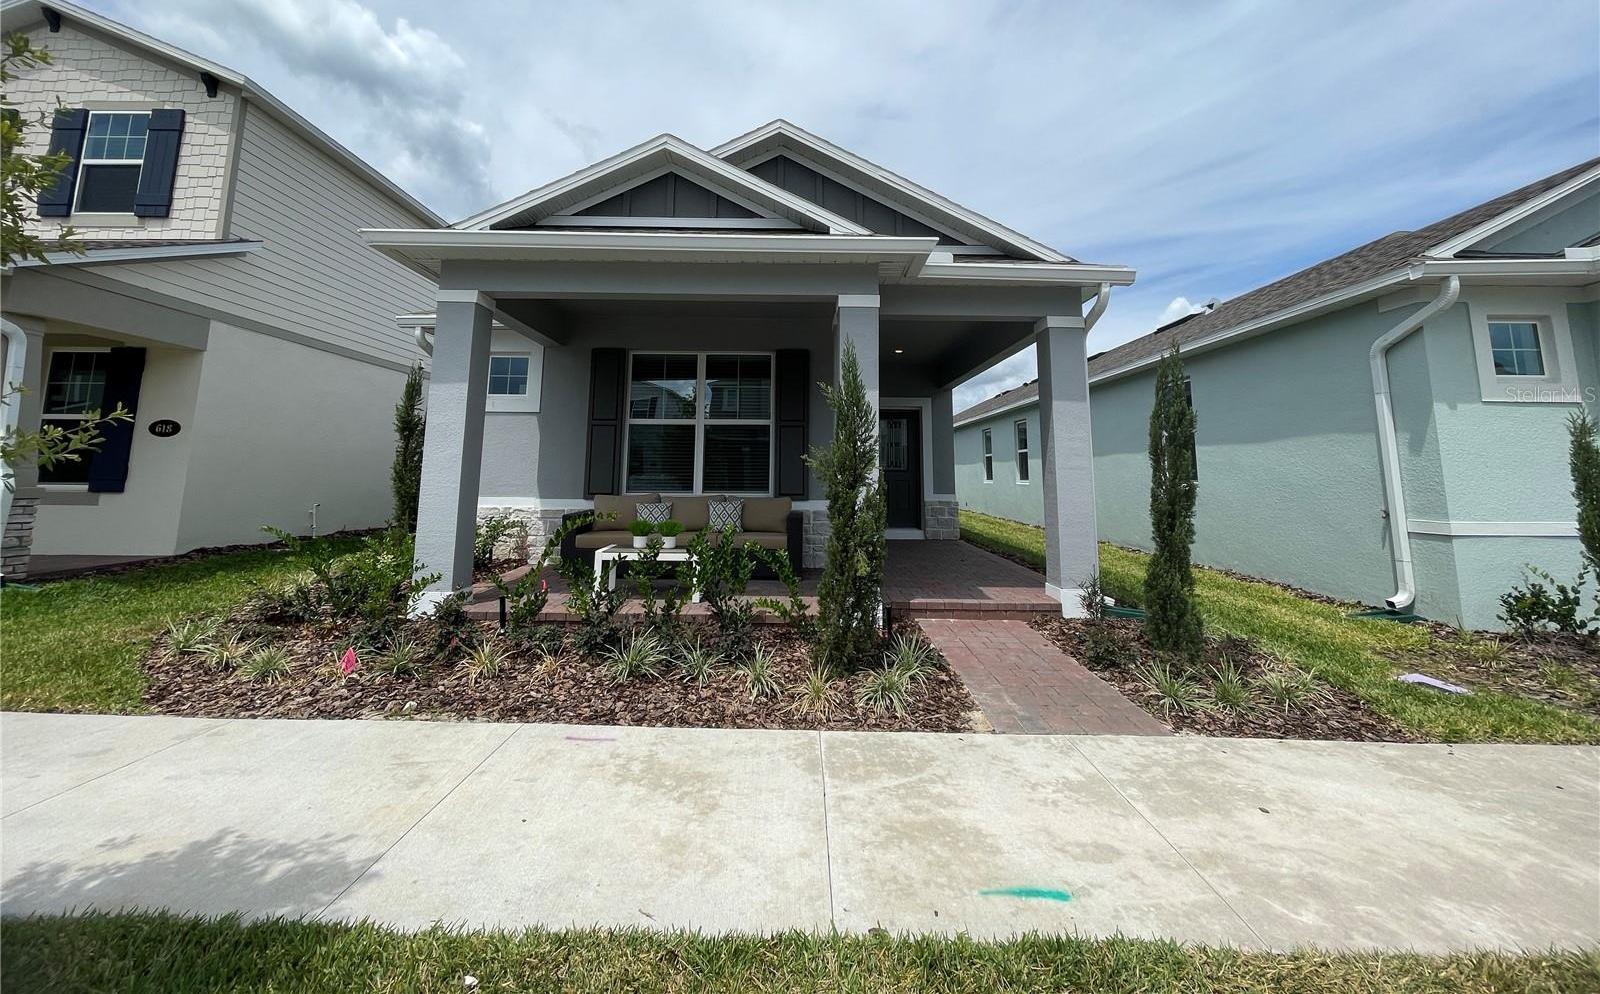 Photo one of 614 Becklow St Debary FL 32713 | MLS O6167545